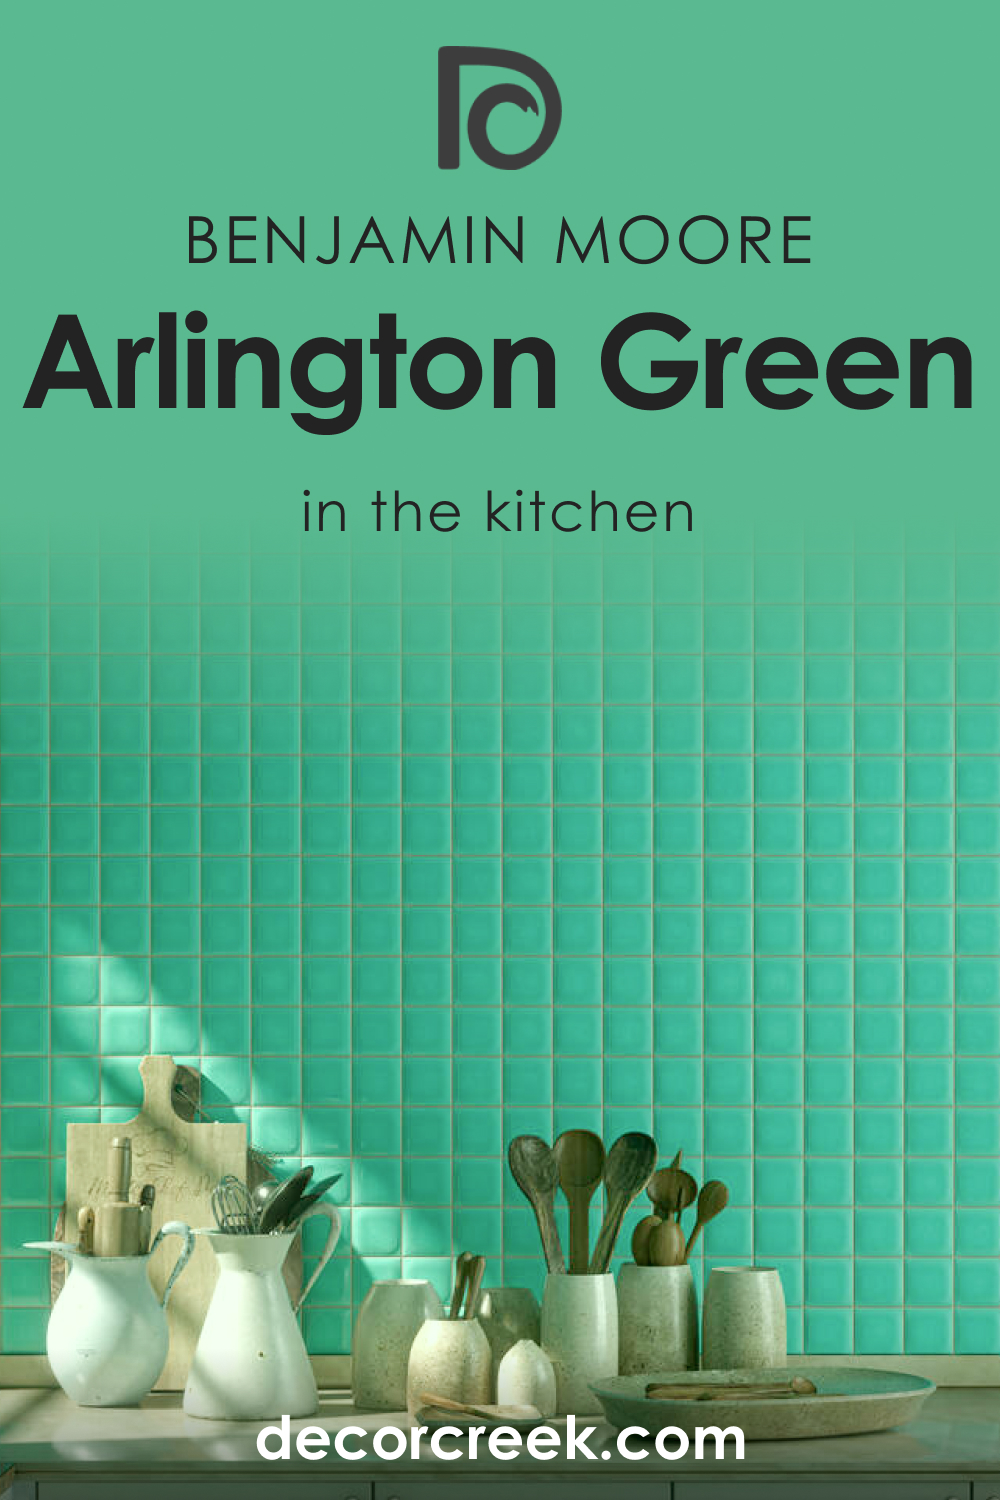 How to Use Arlington Green 580 in the Kitchen?